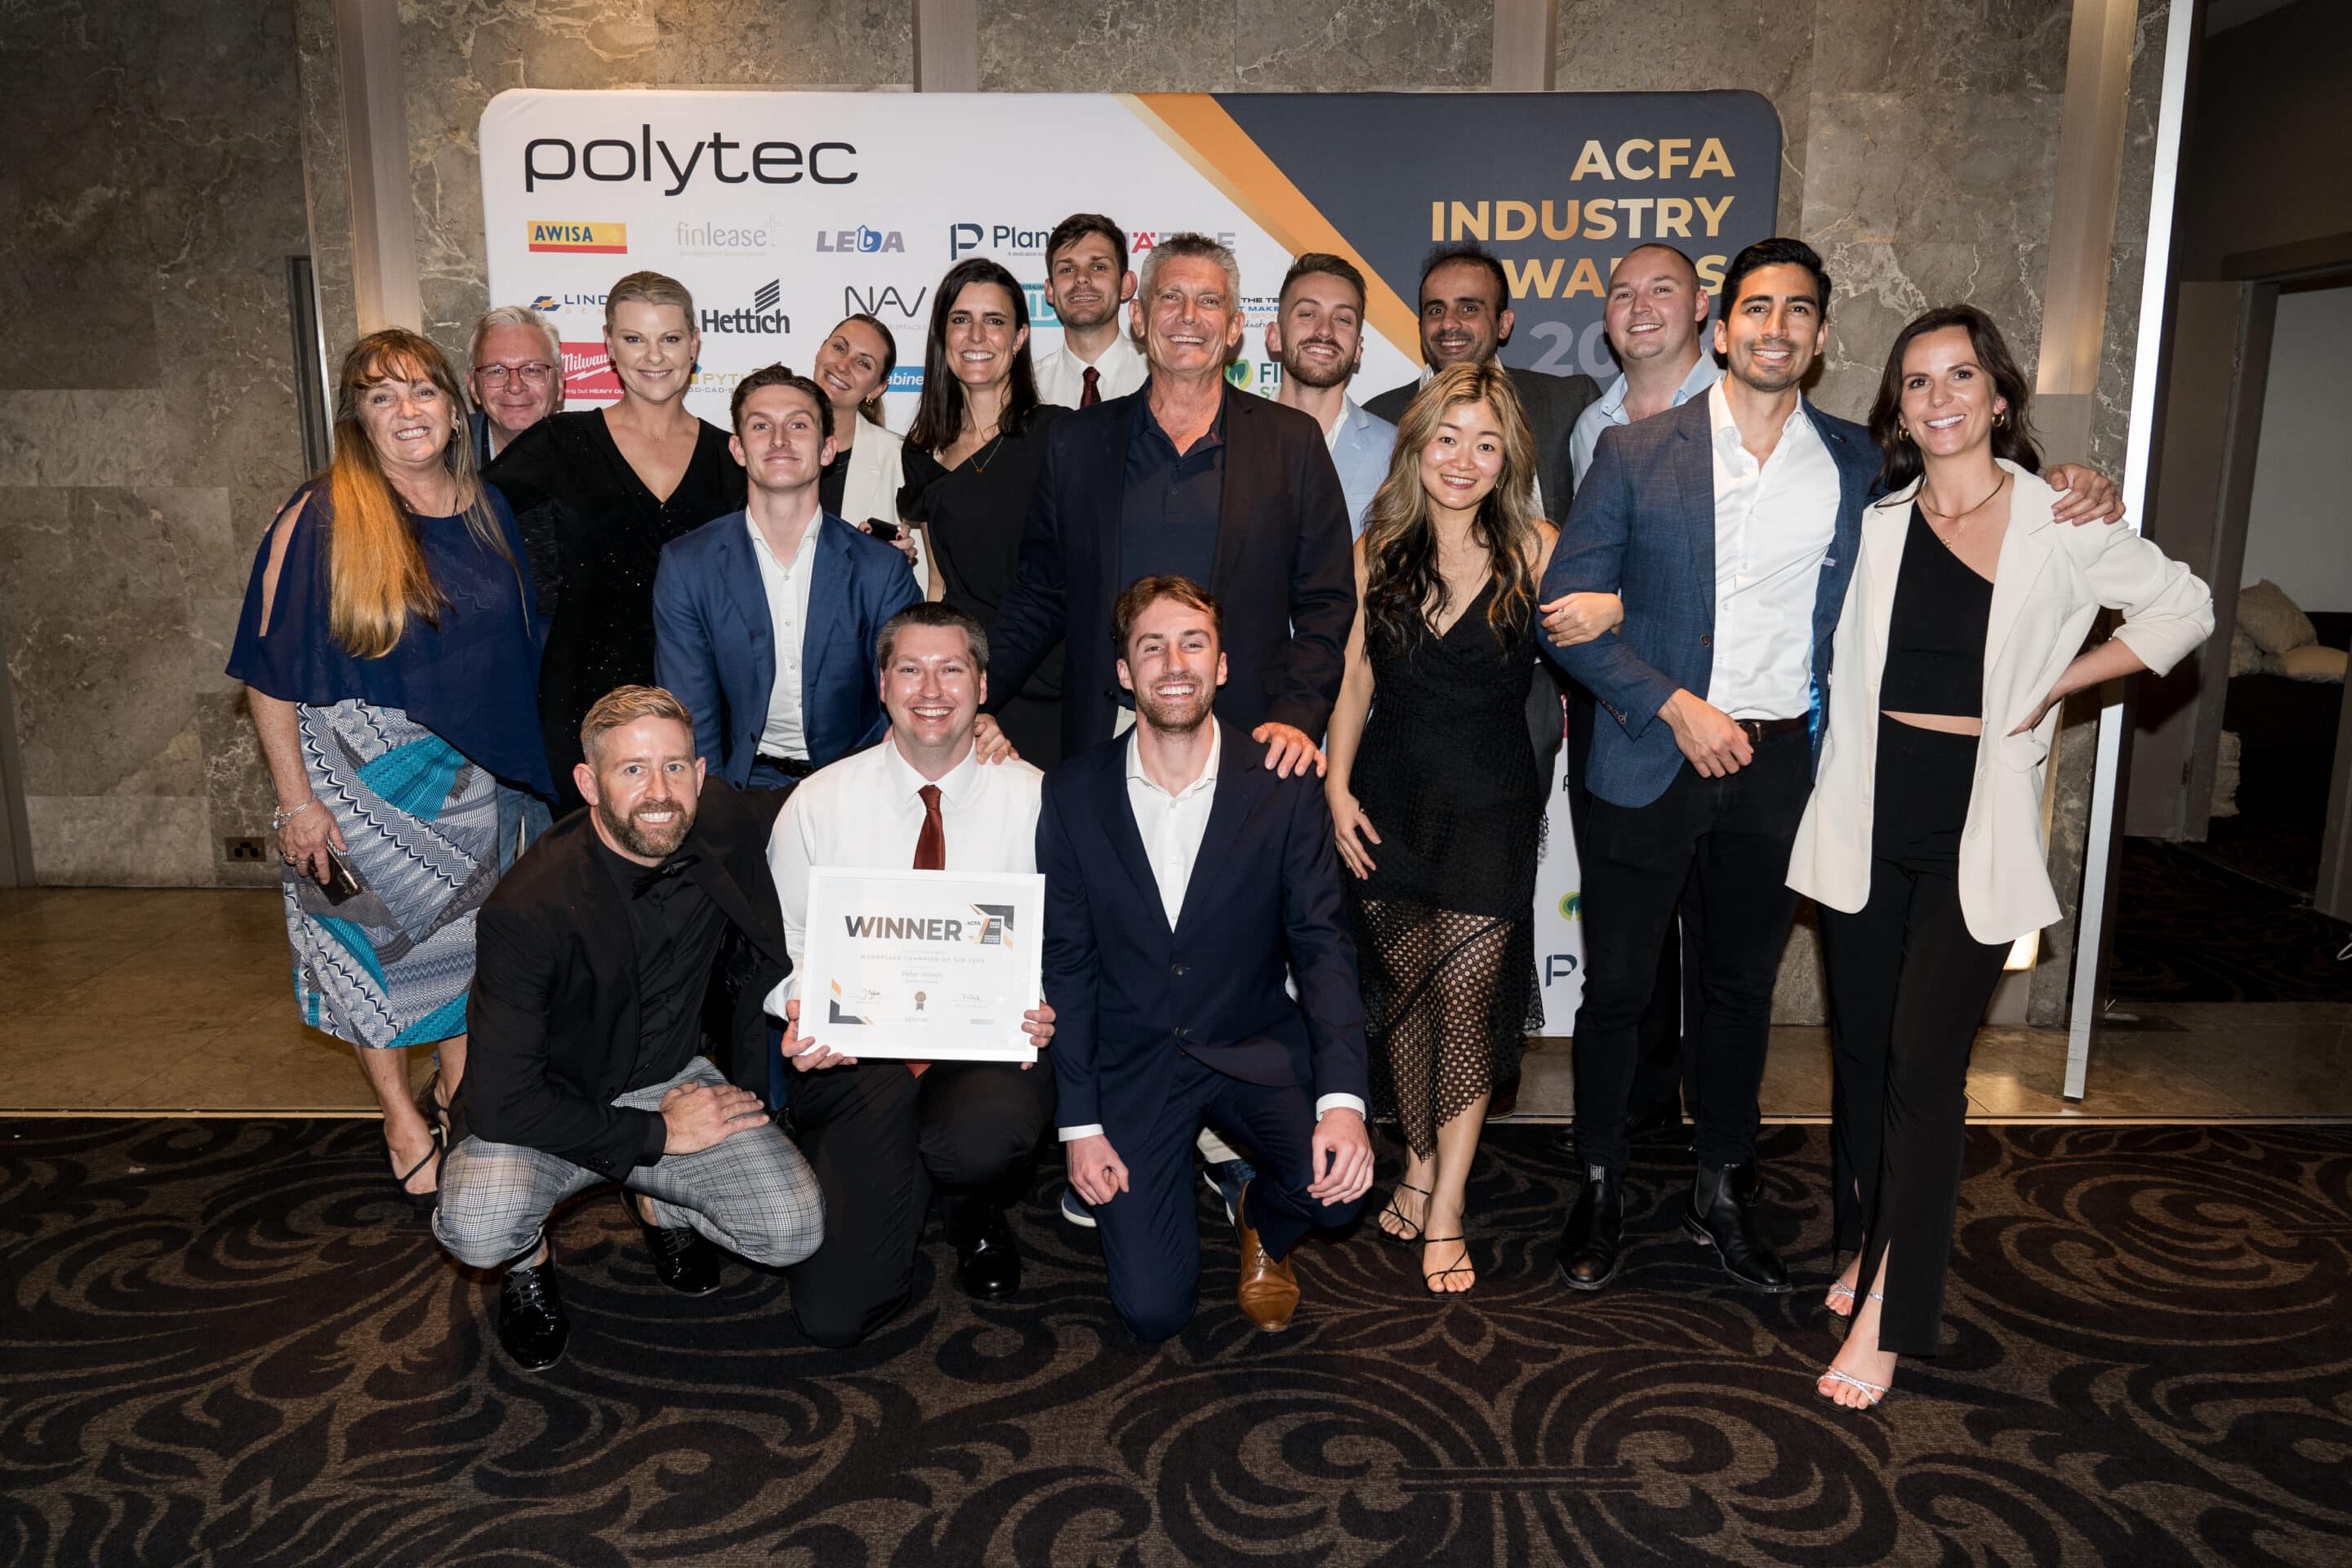 Peter Wilson Win’s ACFA Industry Awards Workplace Champion of the Year 2023